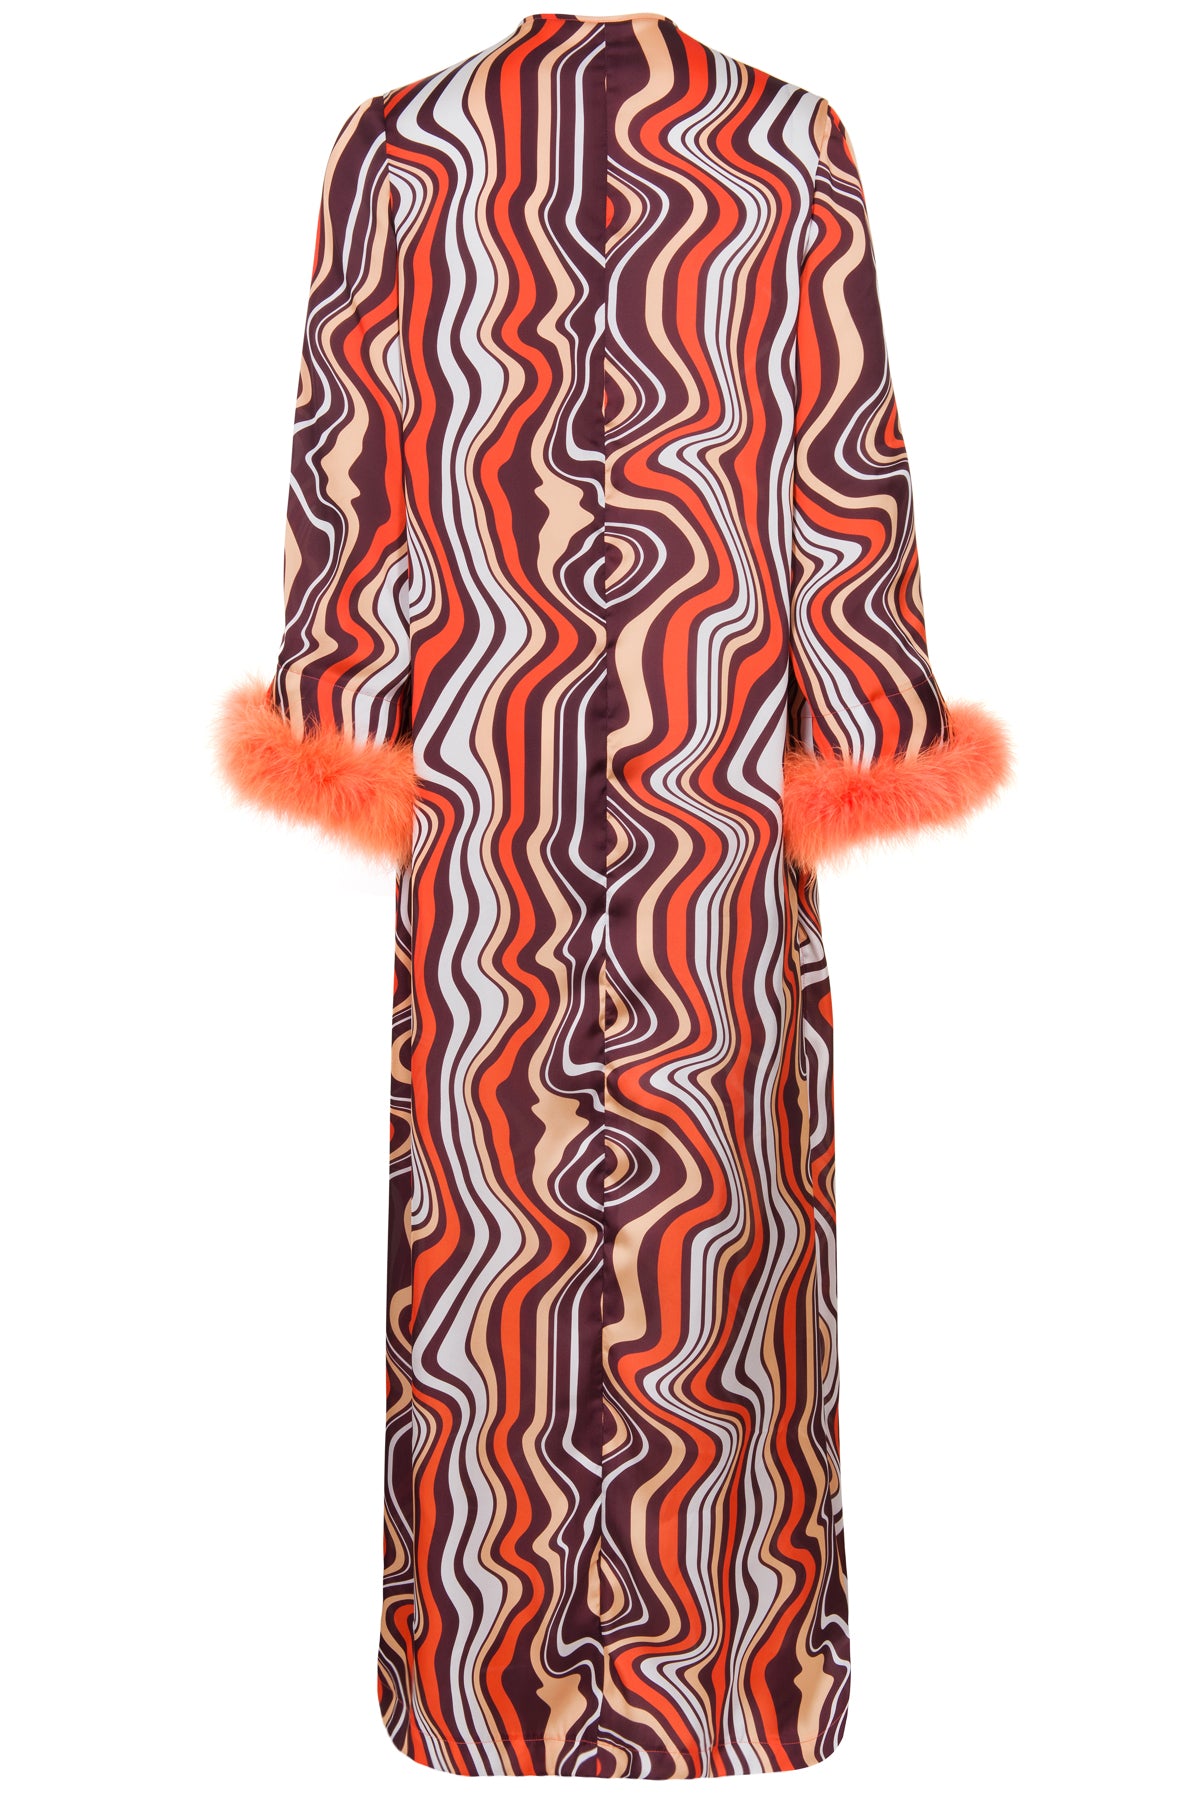 Made to Order Shalimar Psychedelic printed Maxi Dress: Natalie & Alanna - Women's Clothing & Accesssories